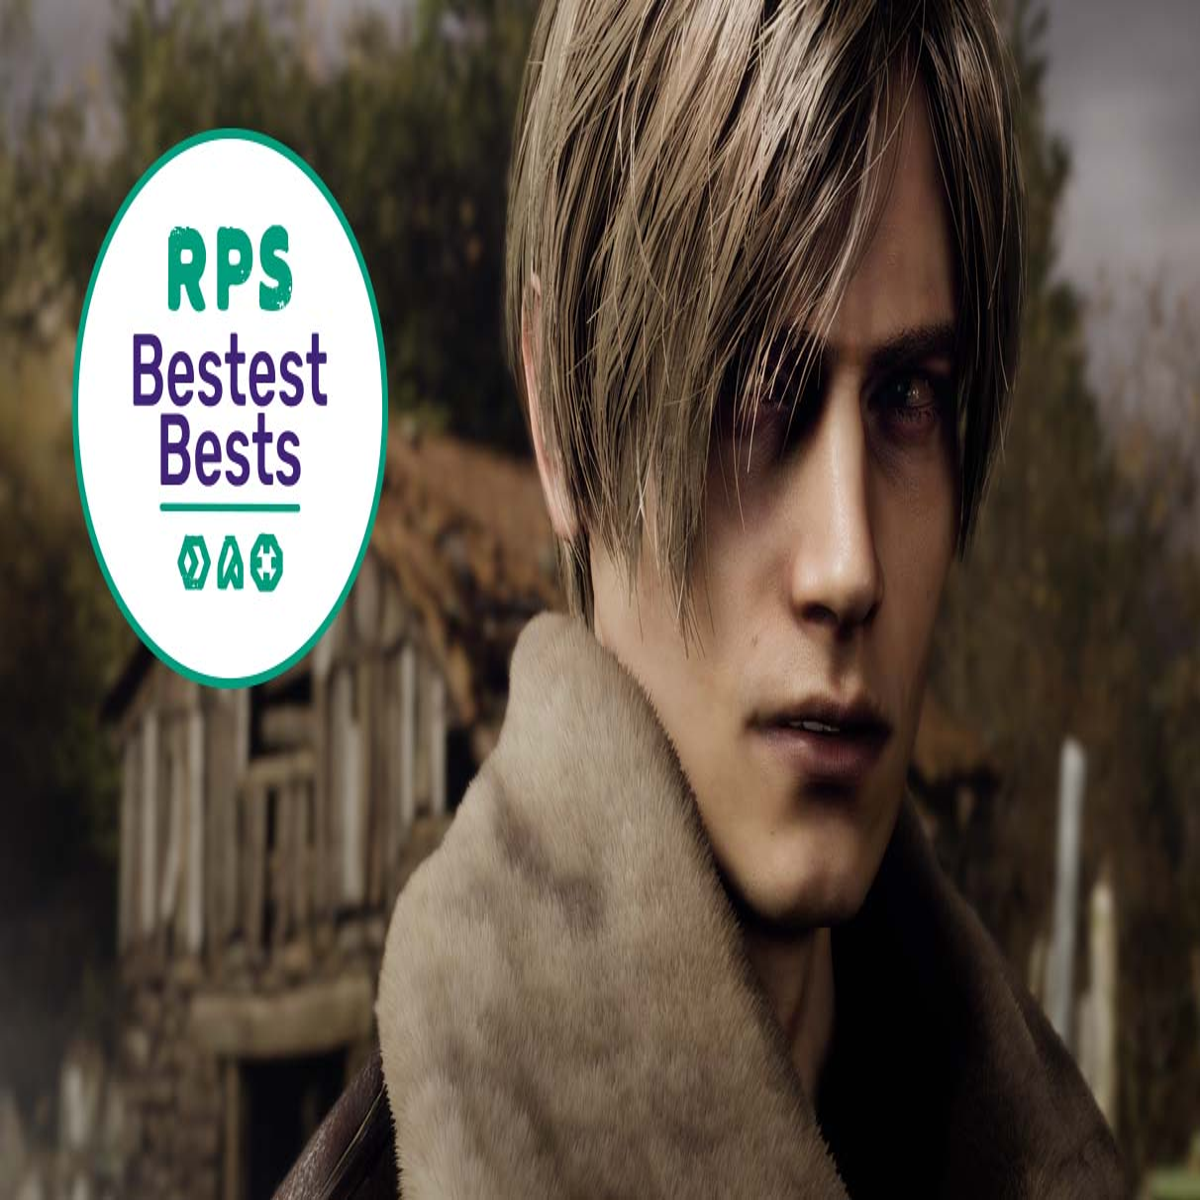 Resident Evil 4 Remake review: A bolder, Leon-hearted version of a